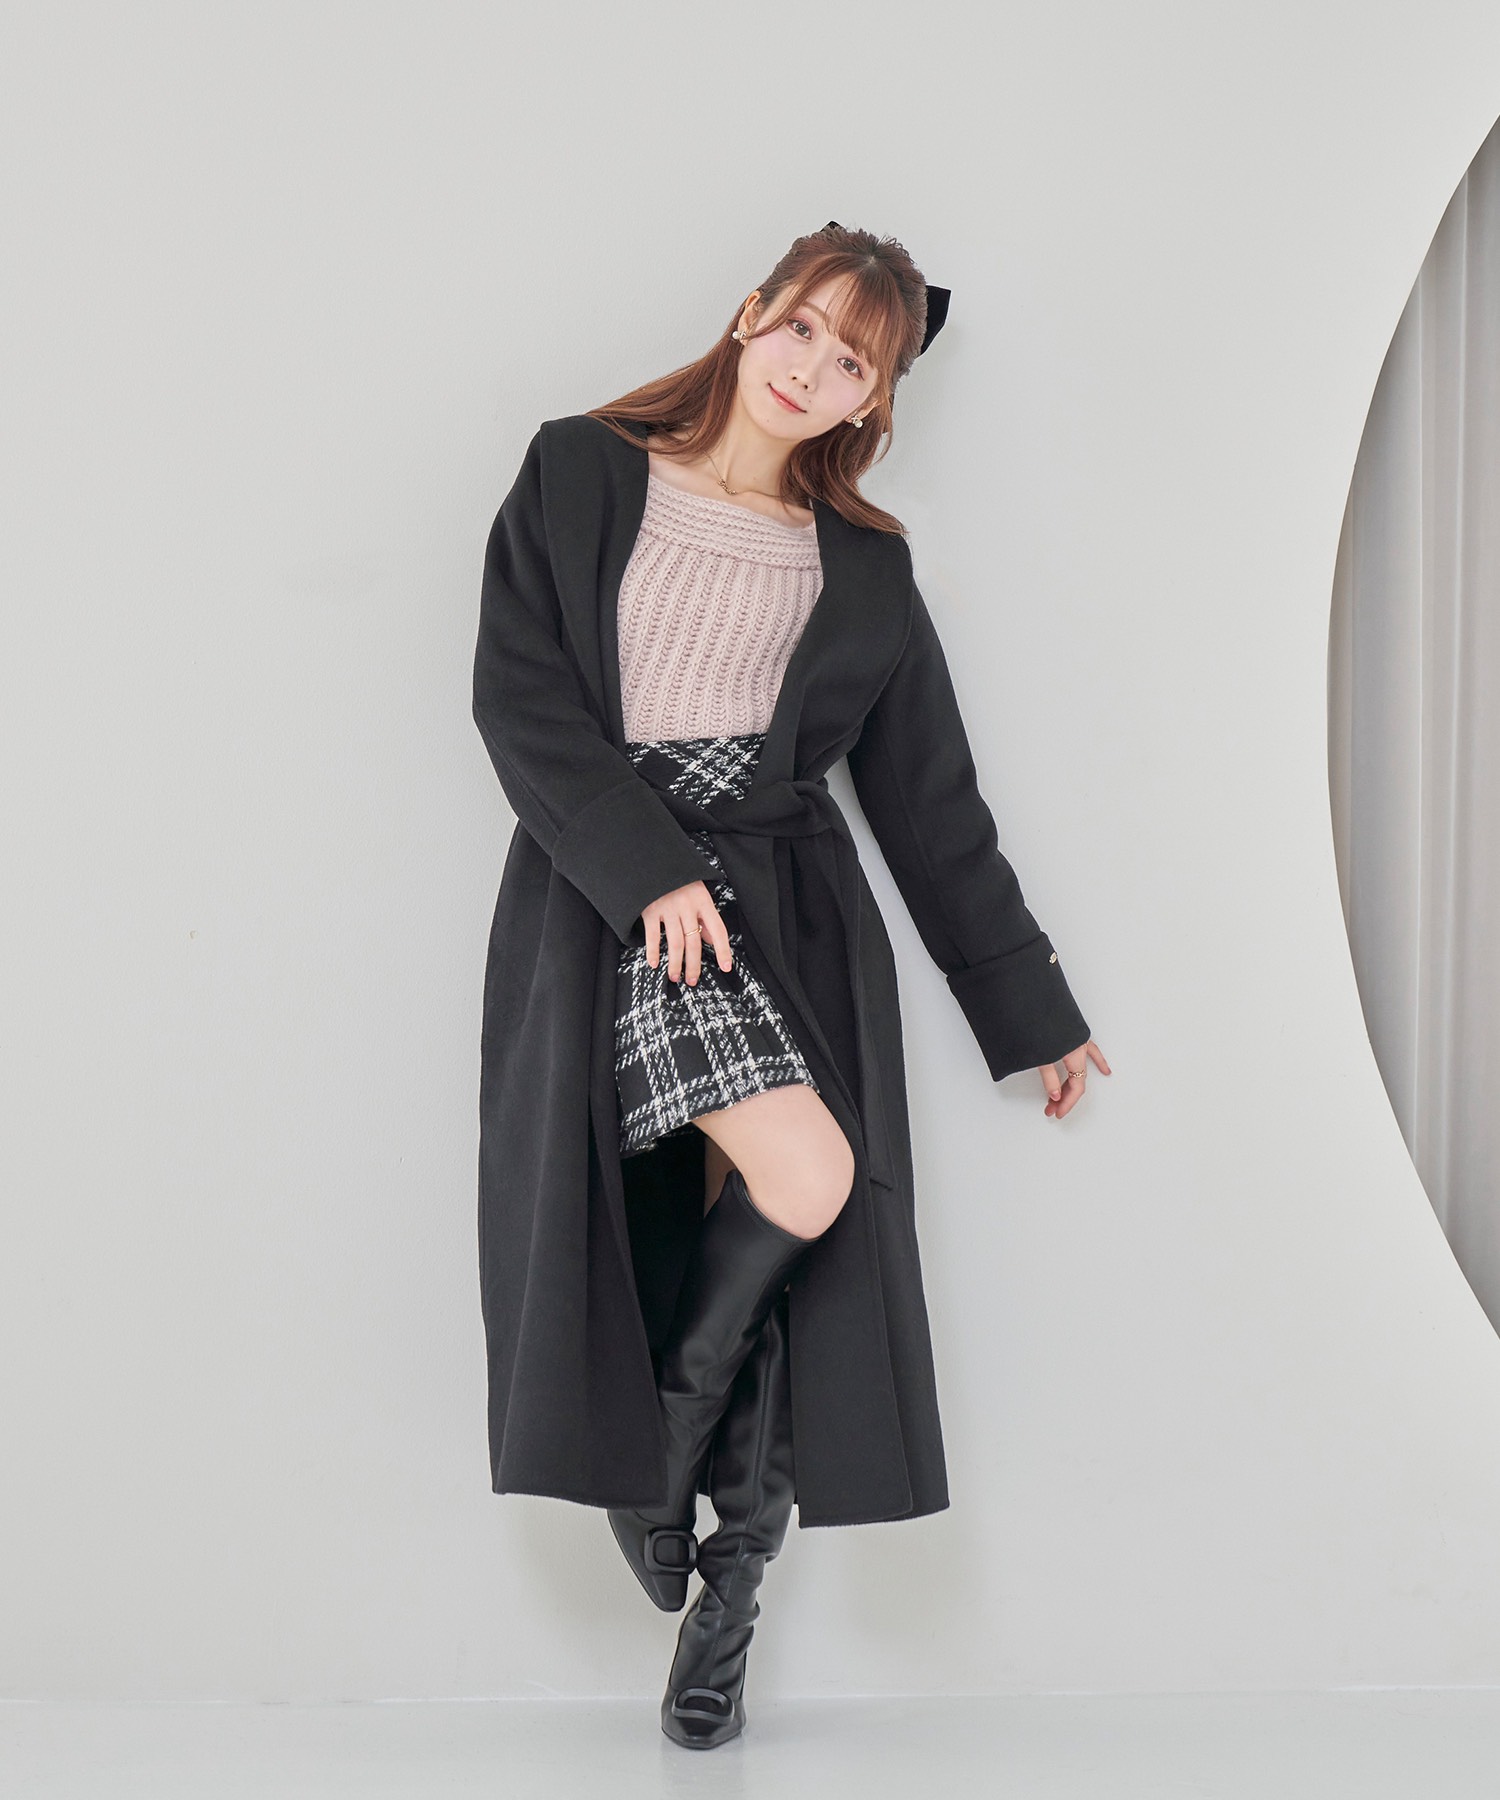 tailored charm coat【white】 – BUNNY APARTMENT